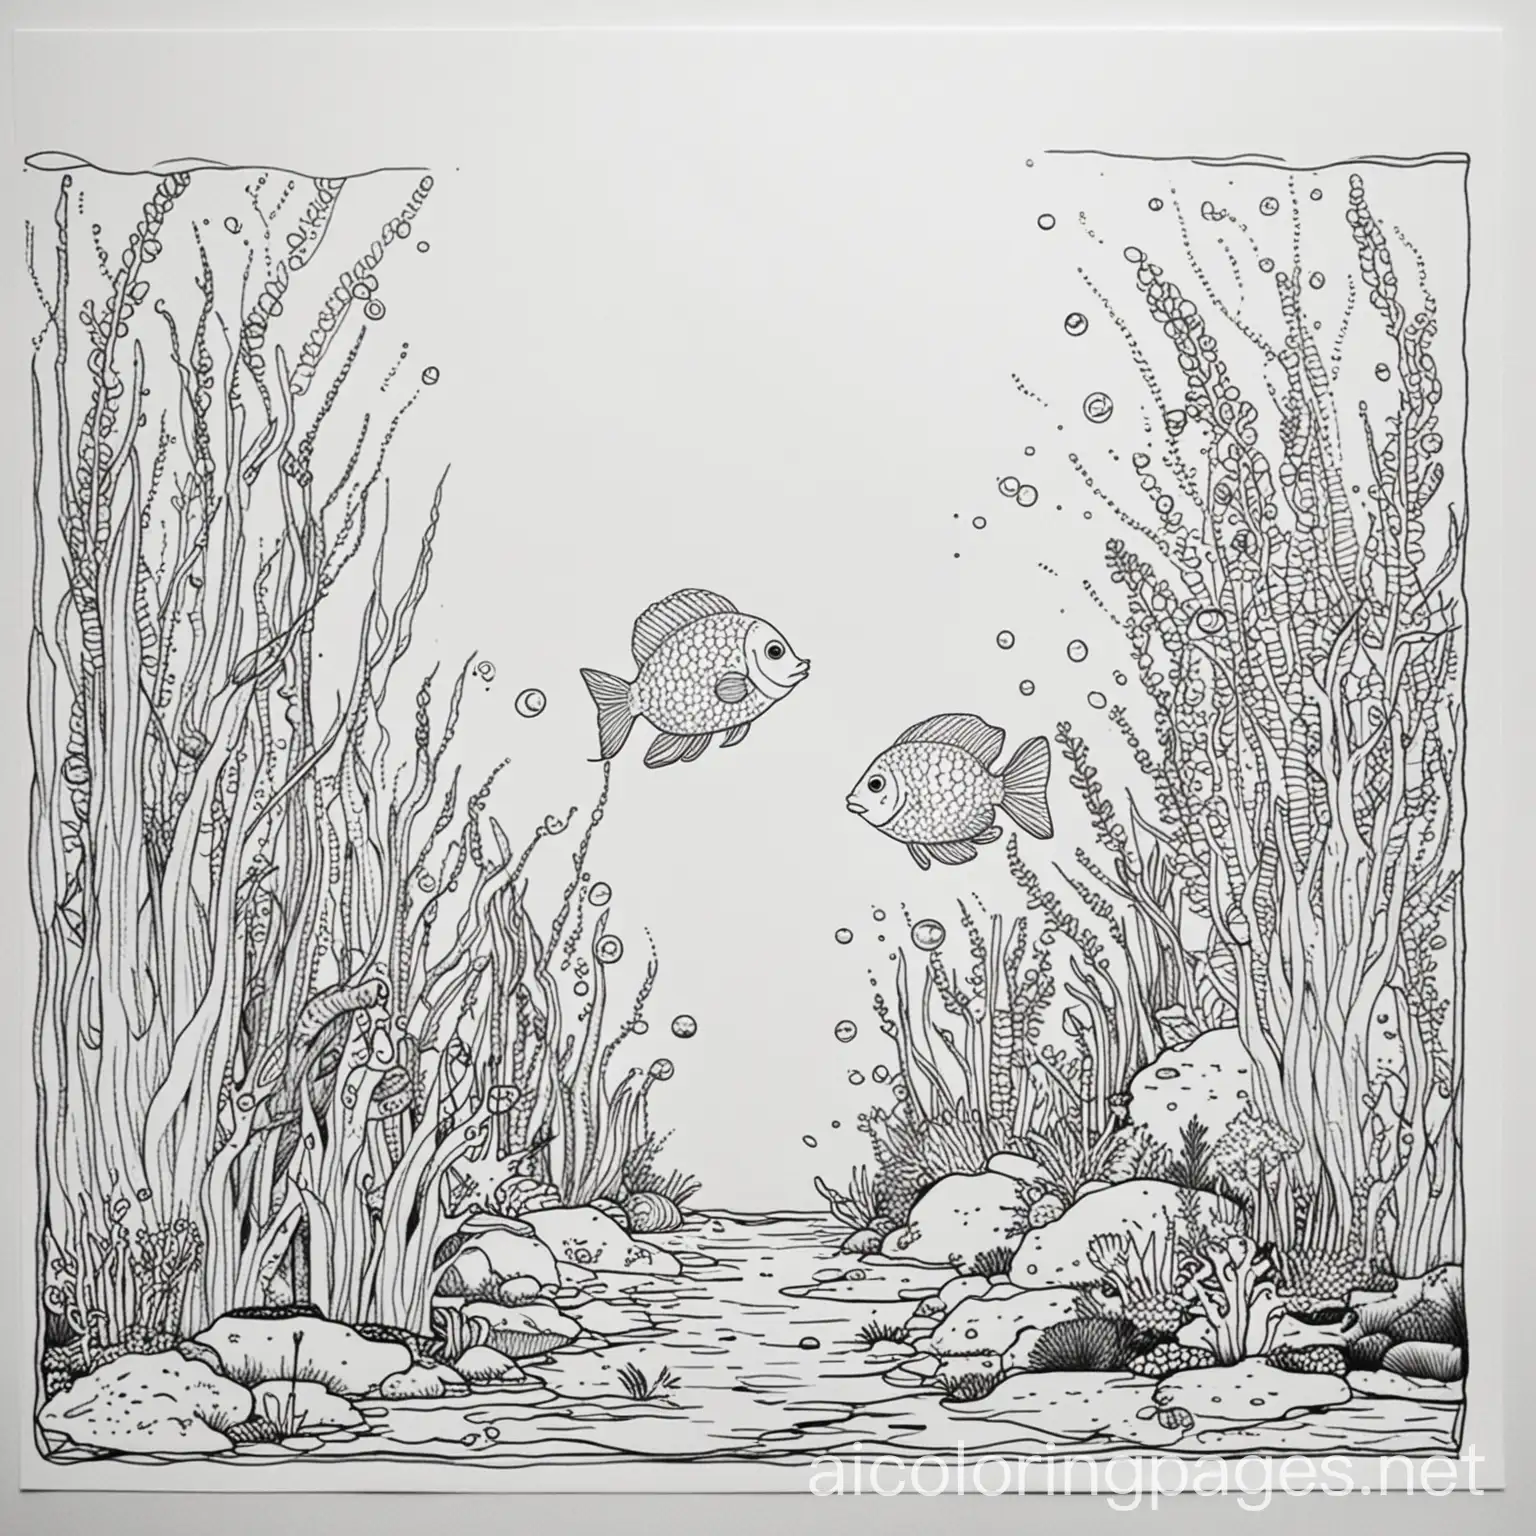 easy aquaium tidepools 
coloring page 


 , Coloring Page, black and white, line art, white background, Simplicity, Ample White Space. The background of the coloring page is plain white to make it easy for young children to color within the lines. The outlines of all the subjects are easy to distinguish, making it simple for kids to color without too much difficulty